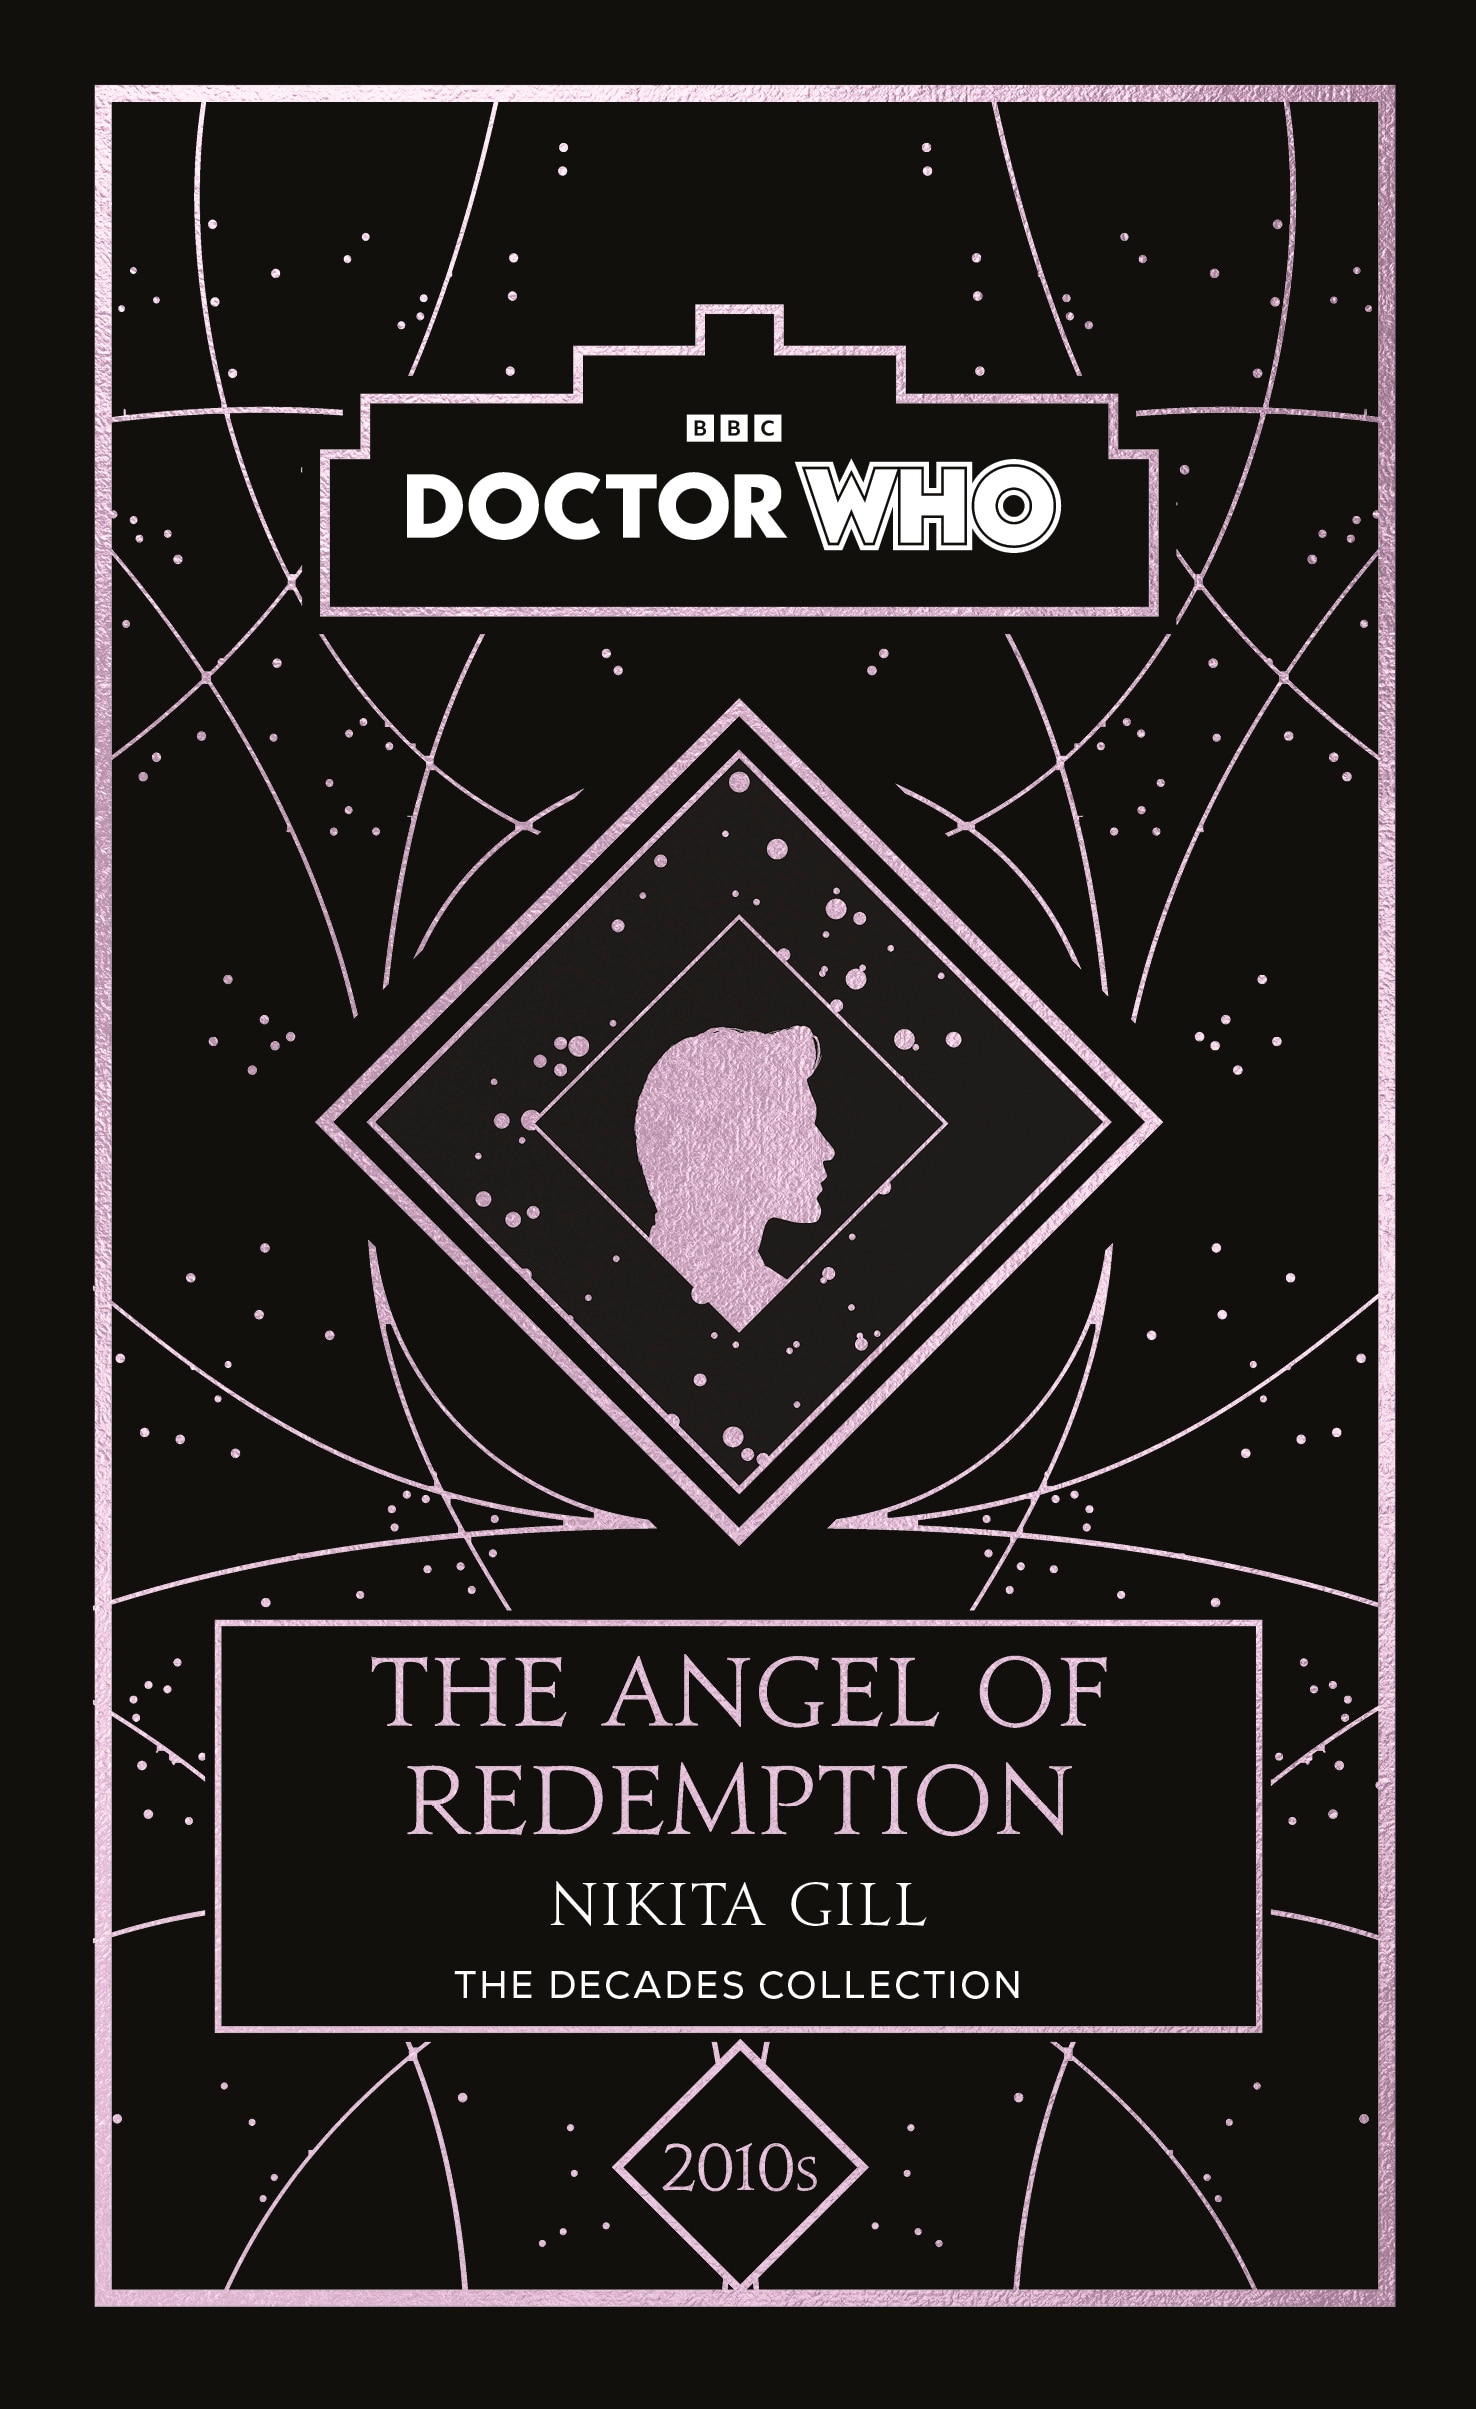 The Angel of Redemption